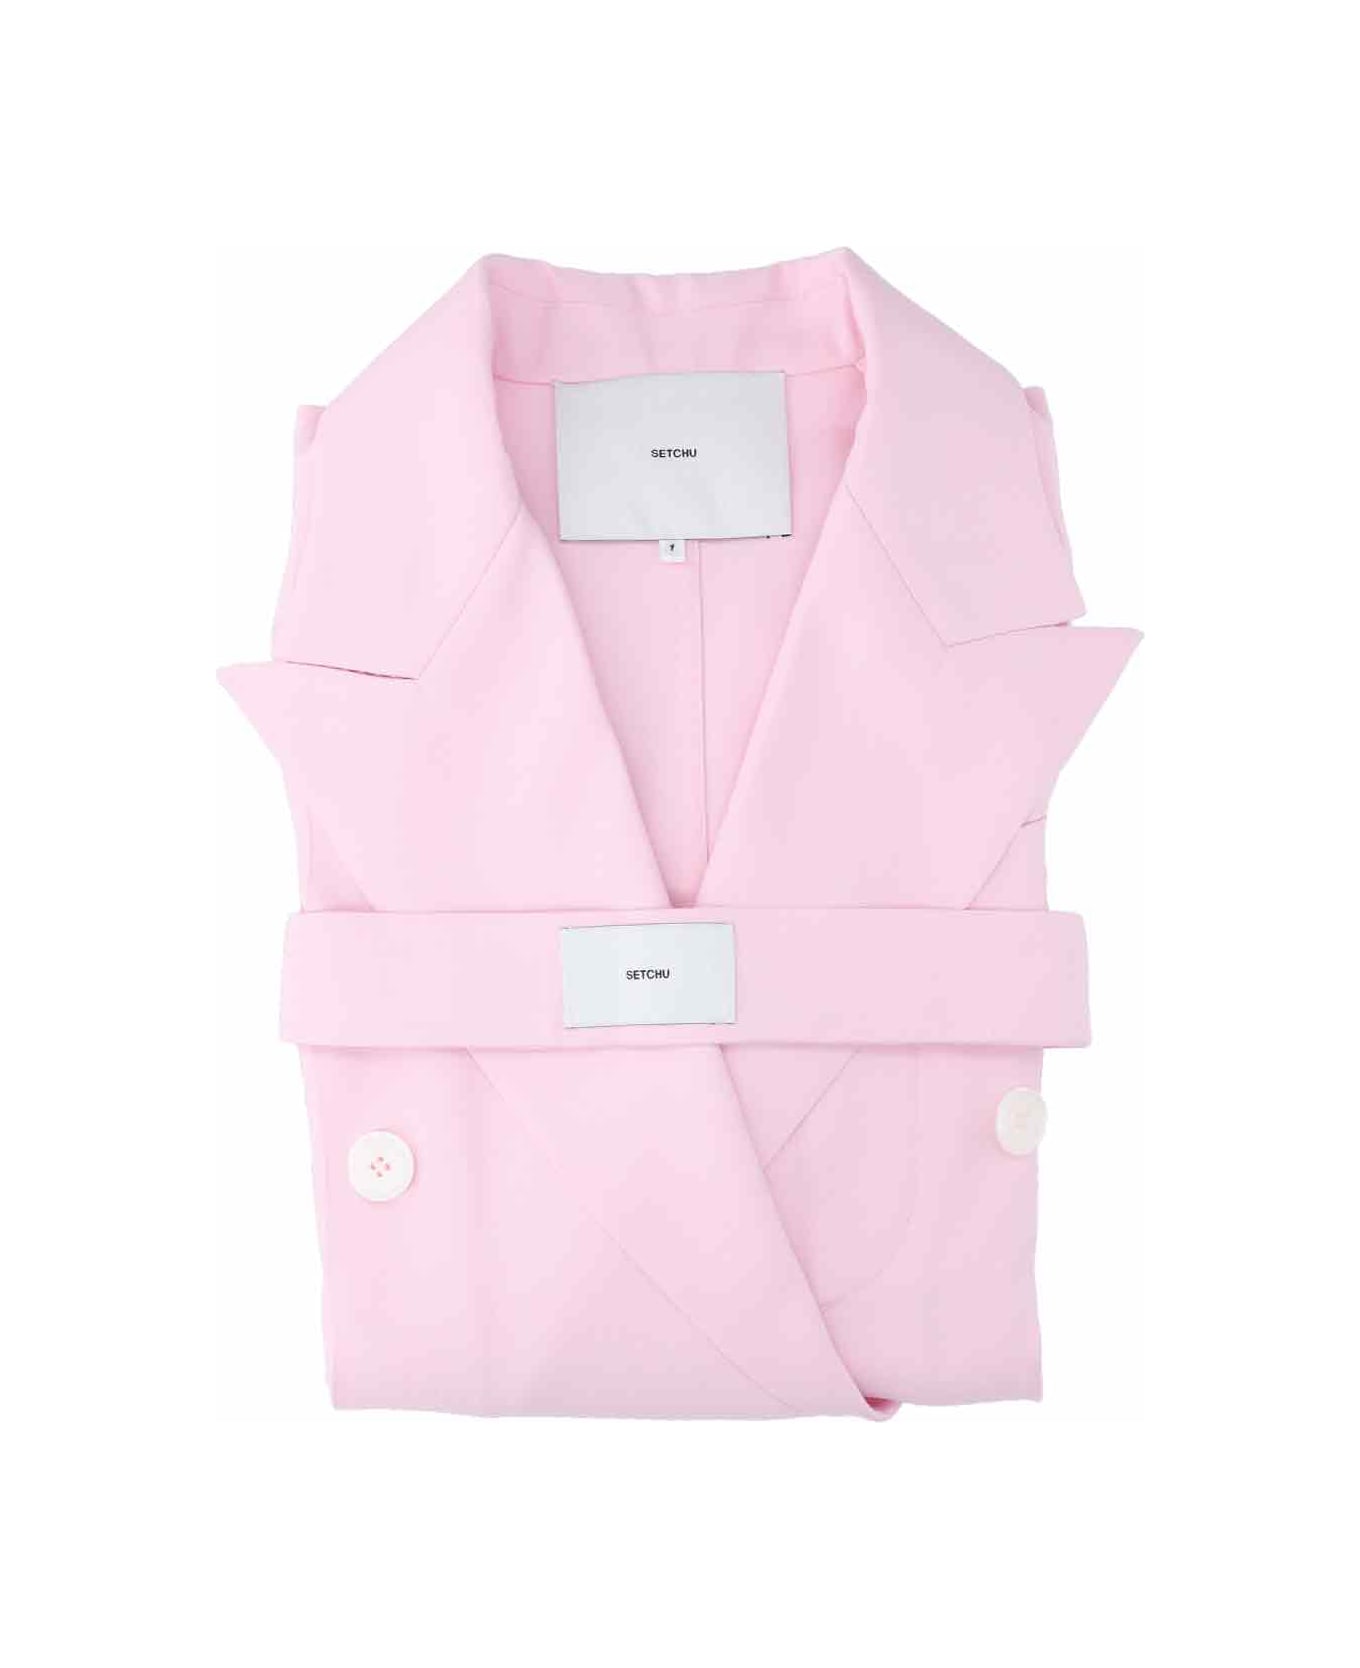 Setchu 'enrico' Double-breasted Blazer - Pink ブレザー